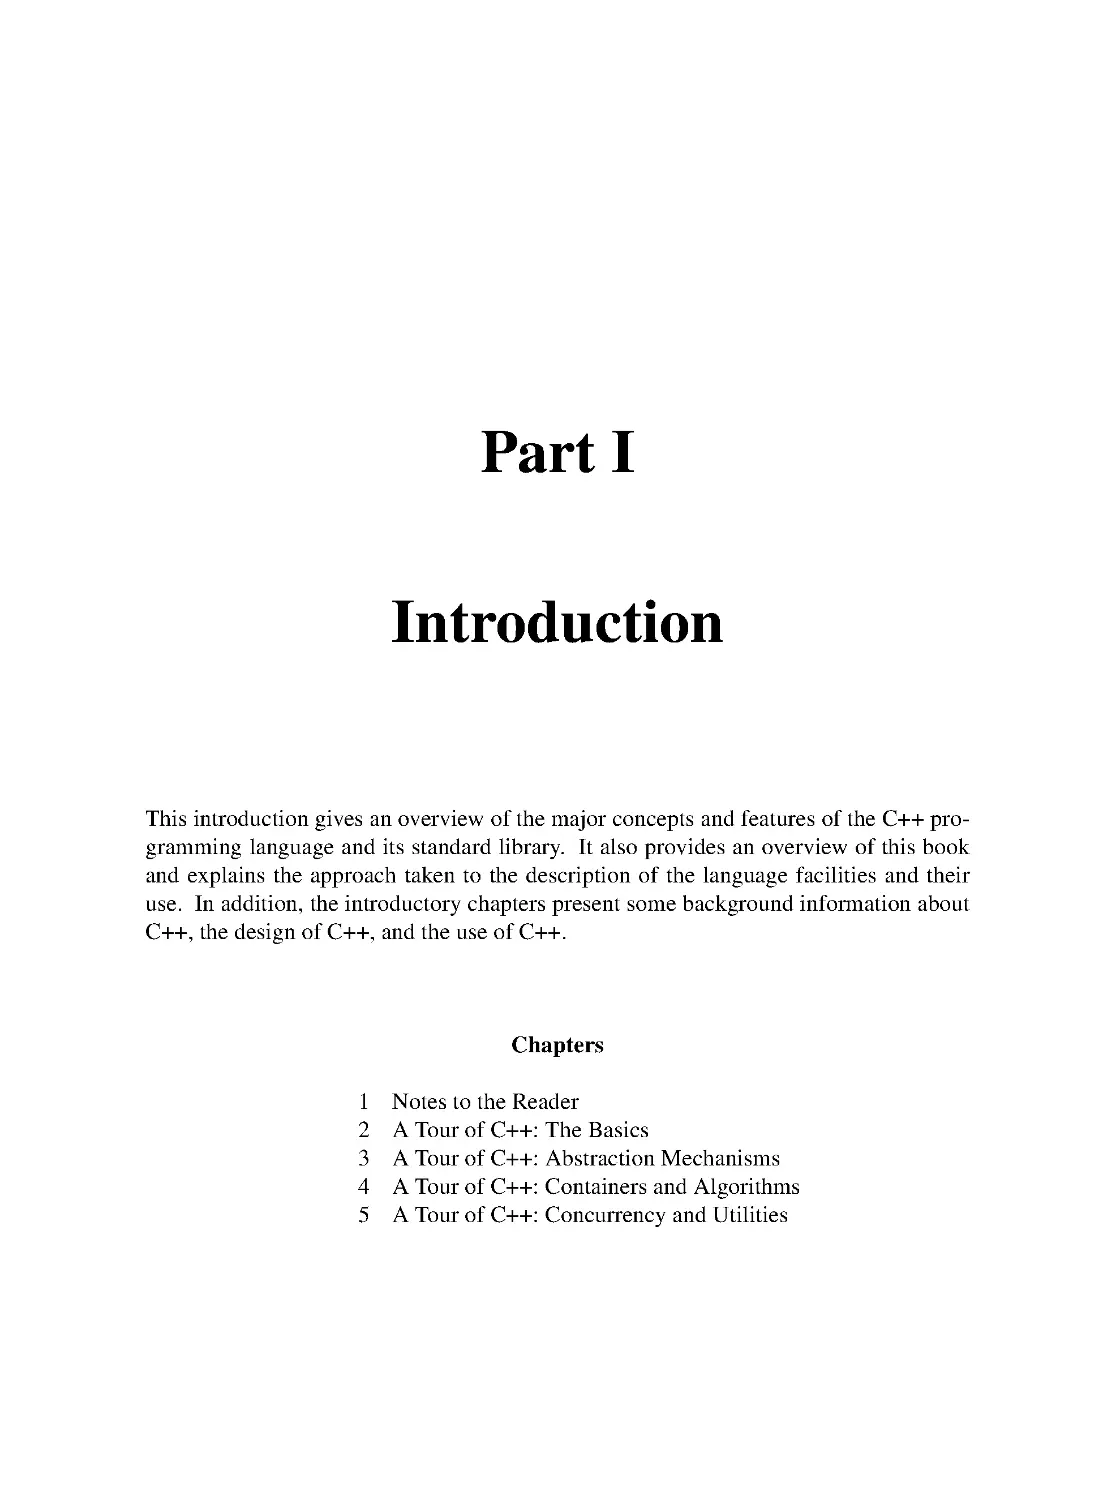 Part I: Introductory Material